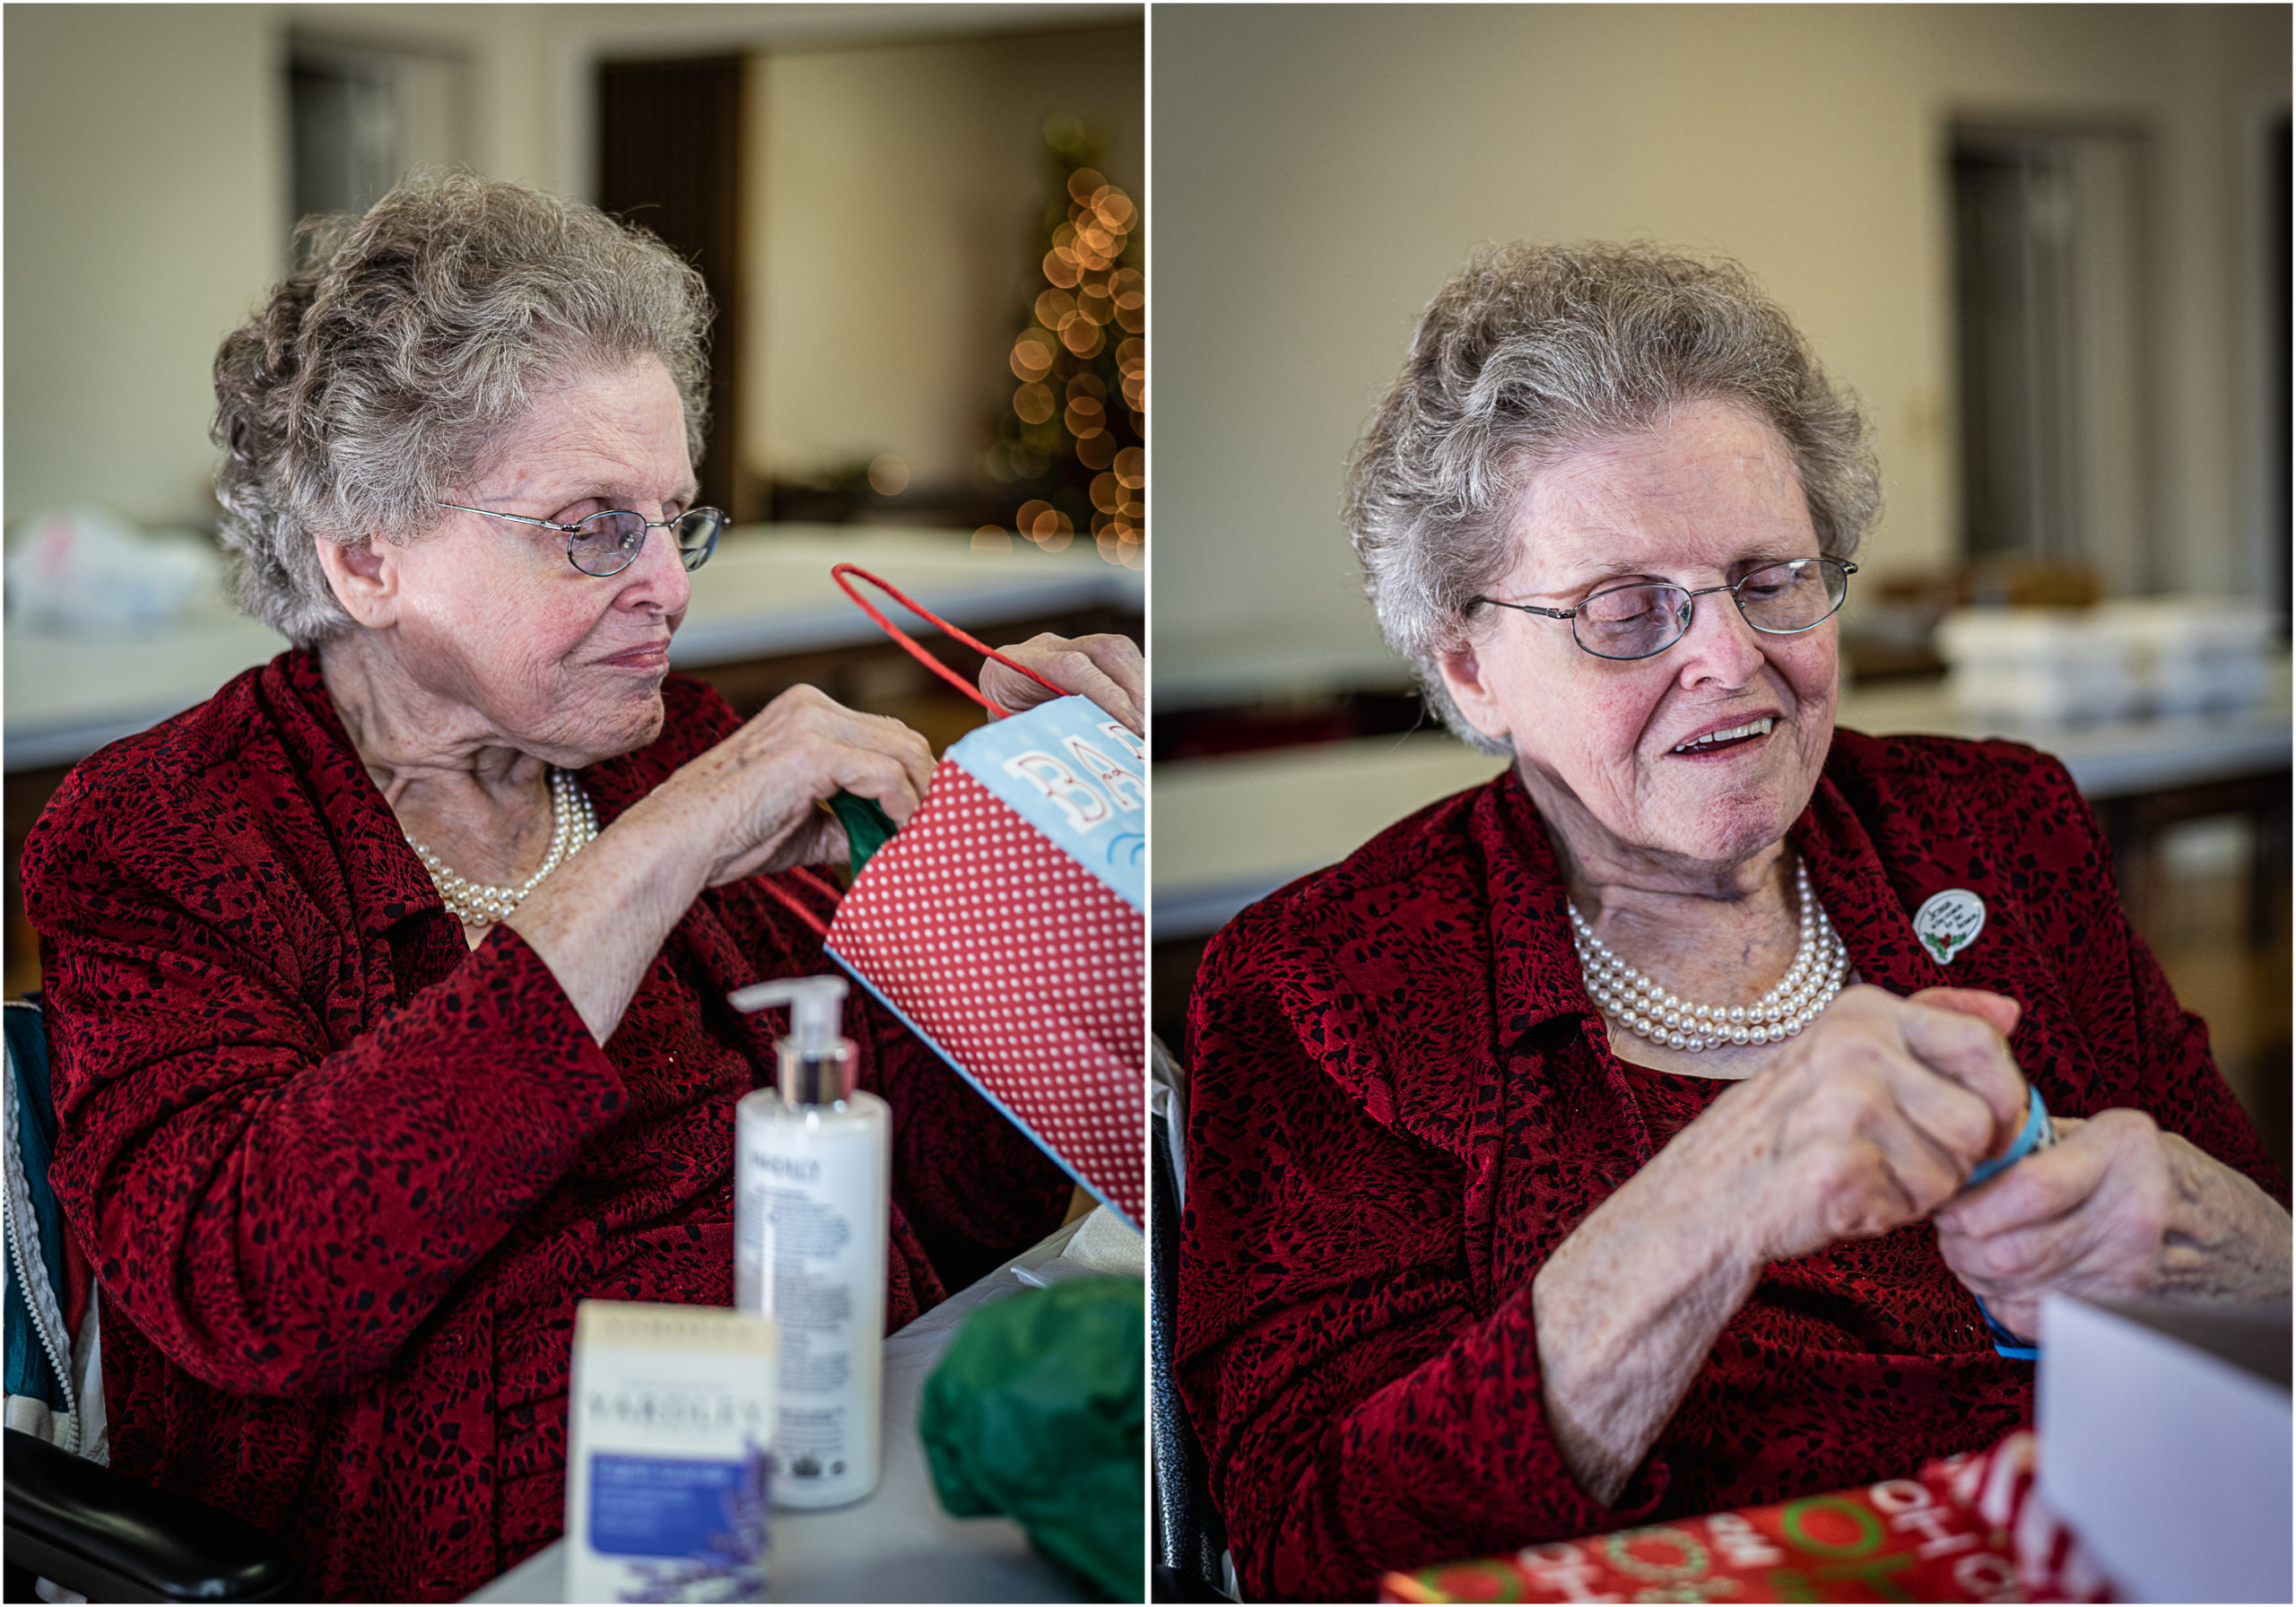 A collage of my grandmother opening gifts on Christmas day.